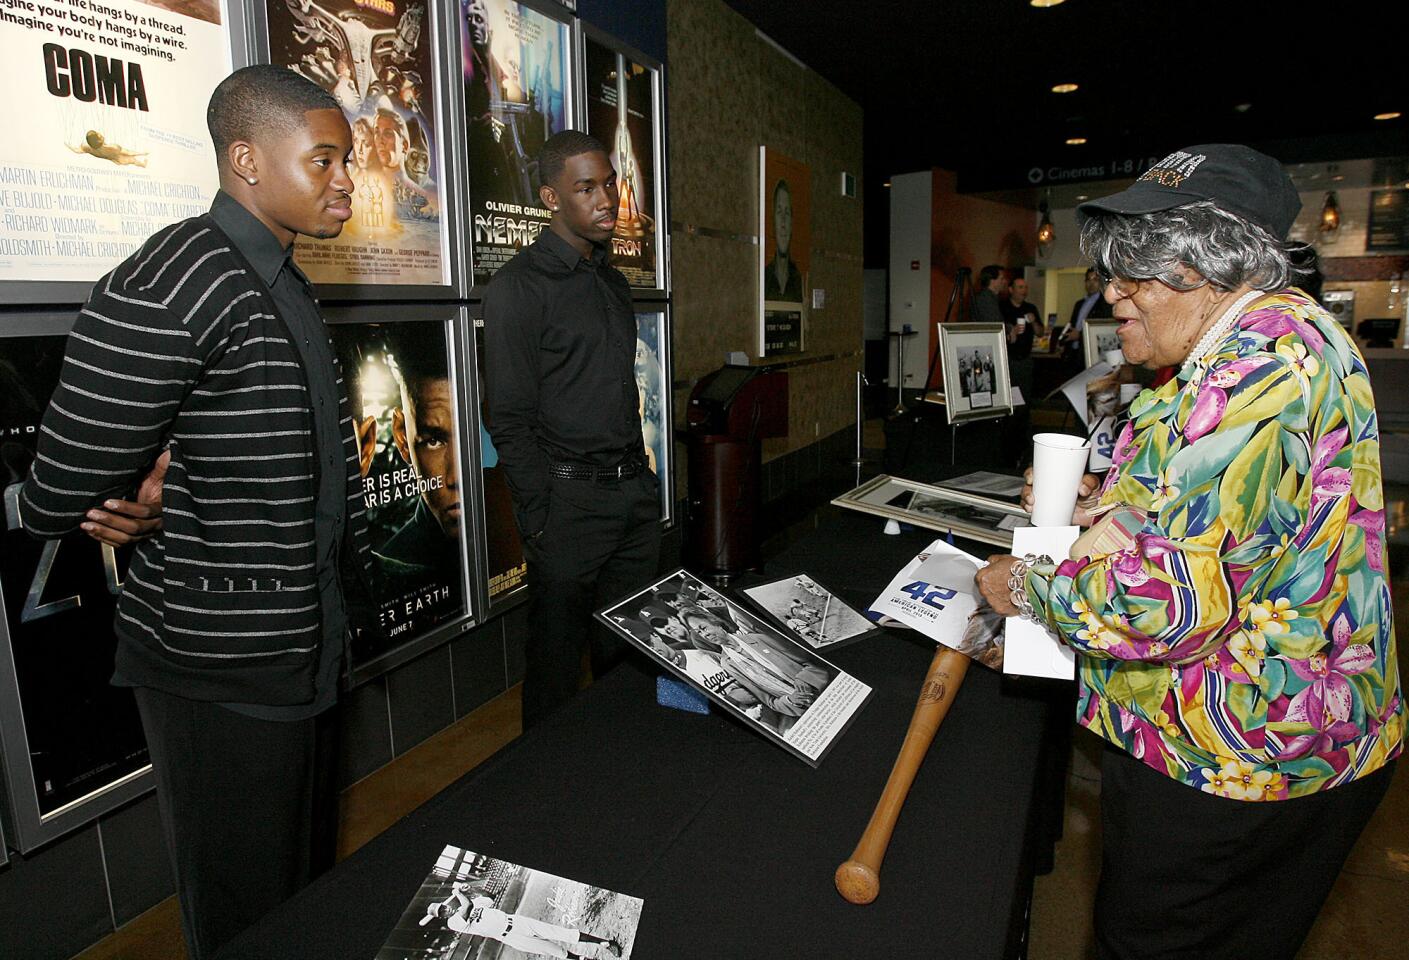 Photo Gallery: Private reception for baseball great Jackie Robinson movie "42"